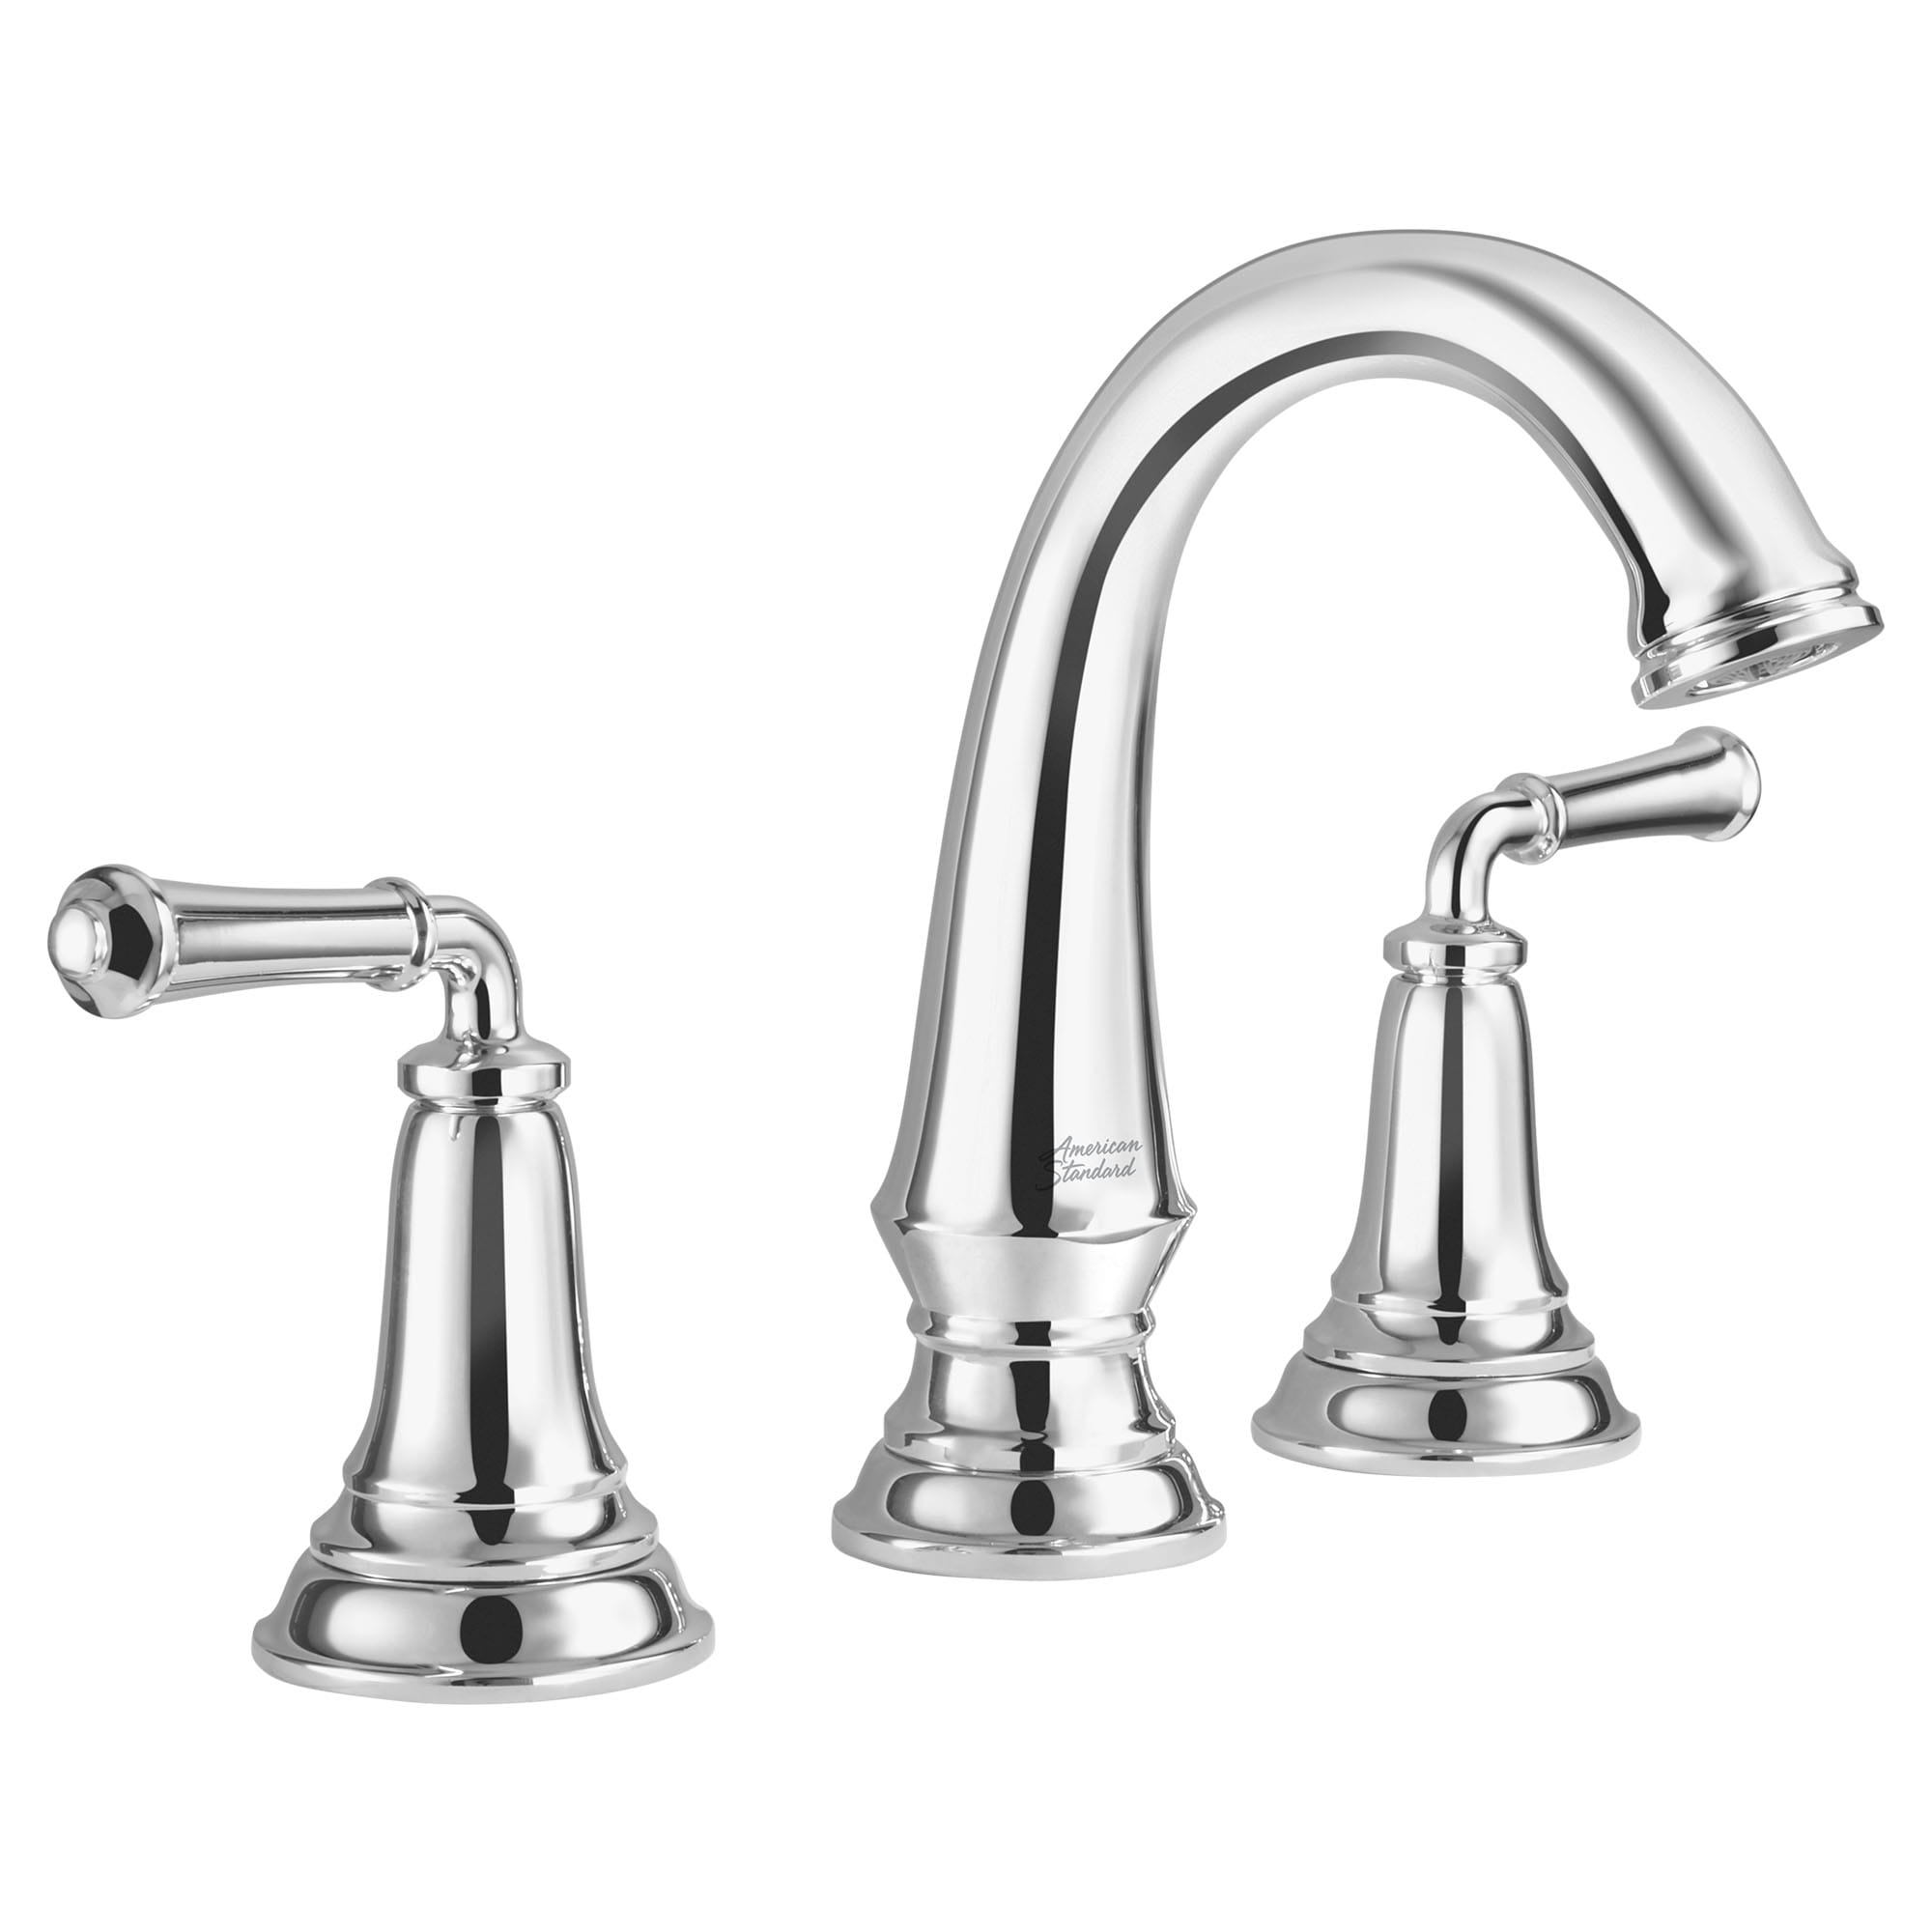 Delancey® 8-Inch Widespread 2-Handle Bathroom Faucet 1.2 gpm/4.5 L/min With Lever Handles